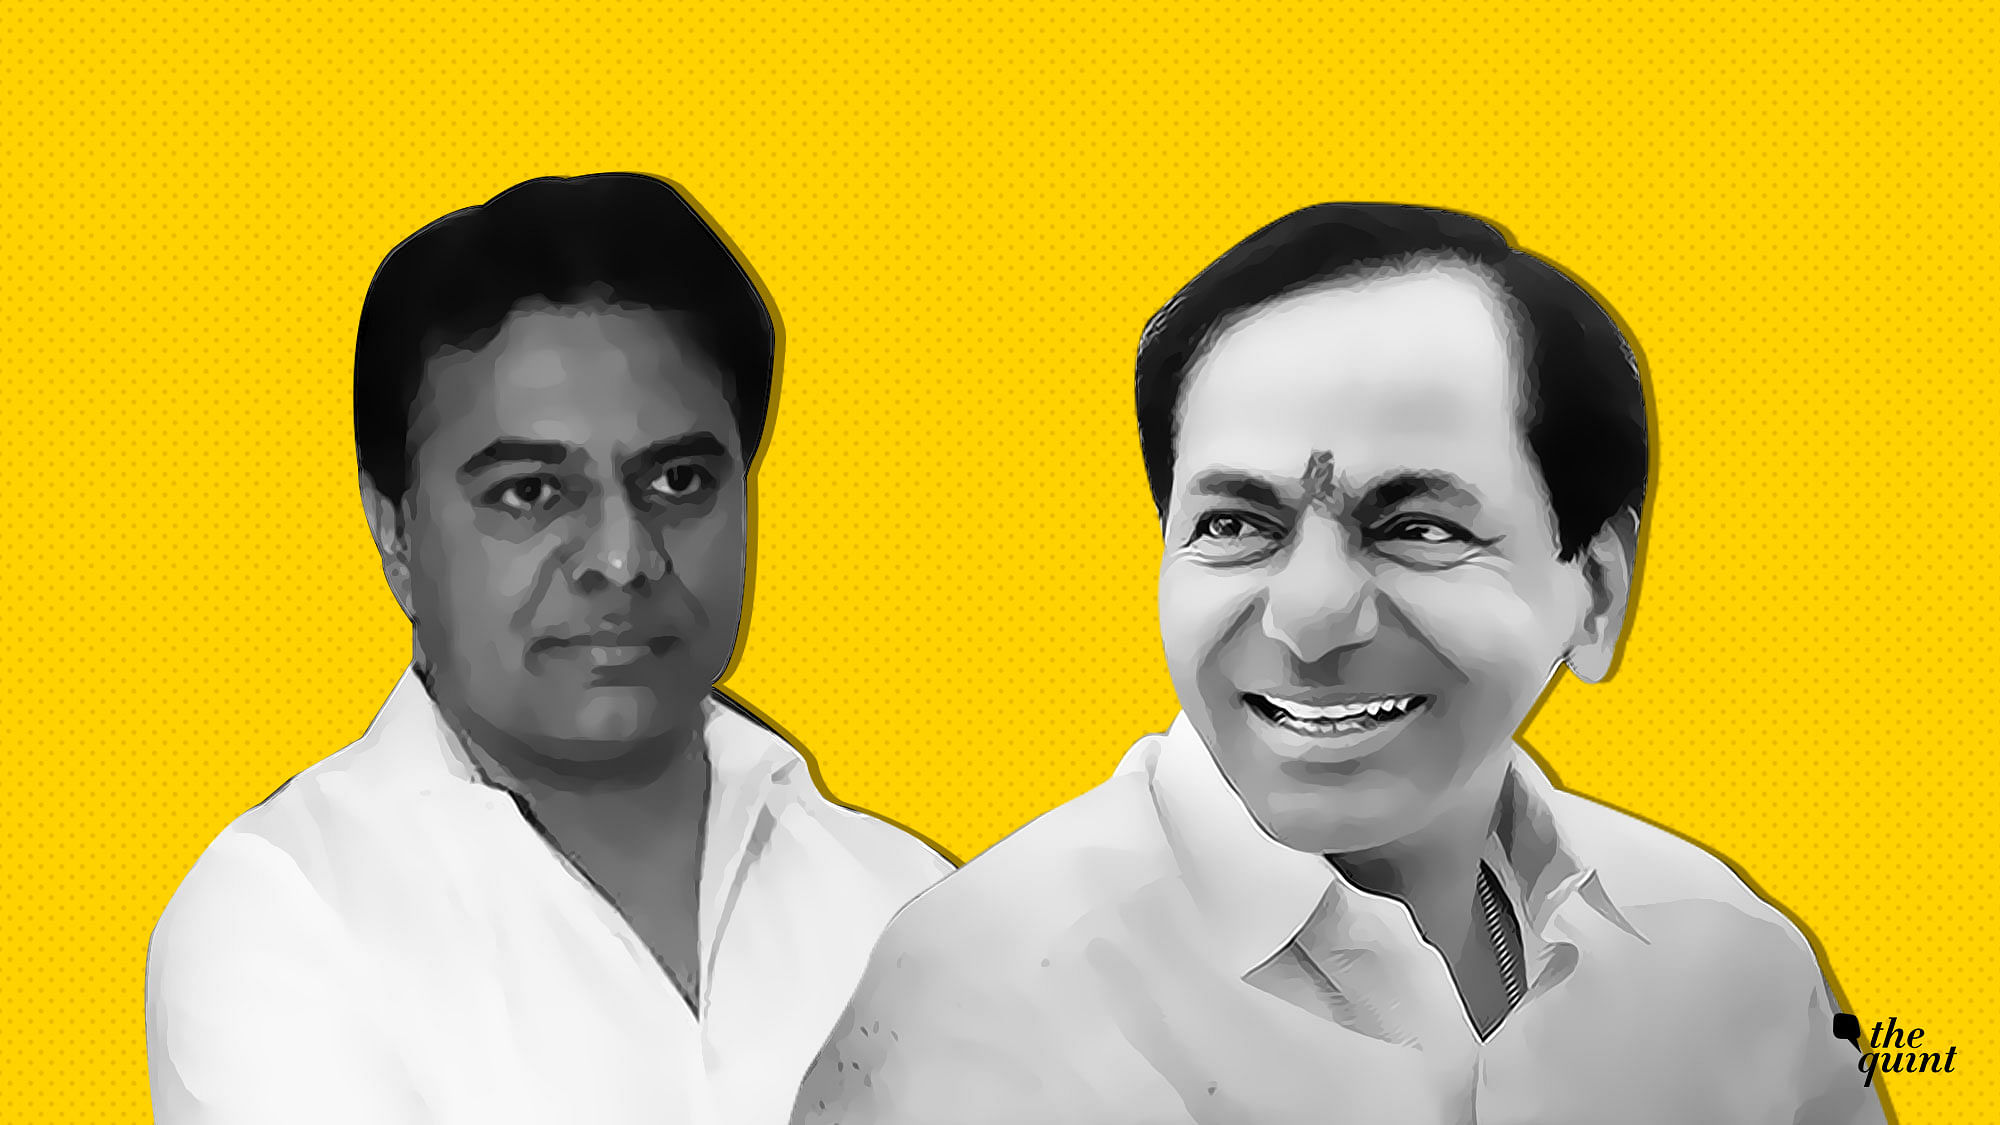 KCR (R), his son KTR (L). Image used for representational purposes.